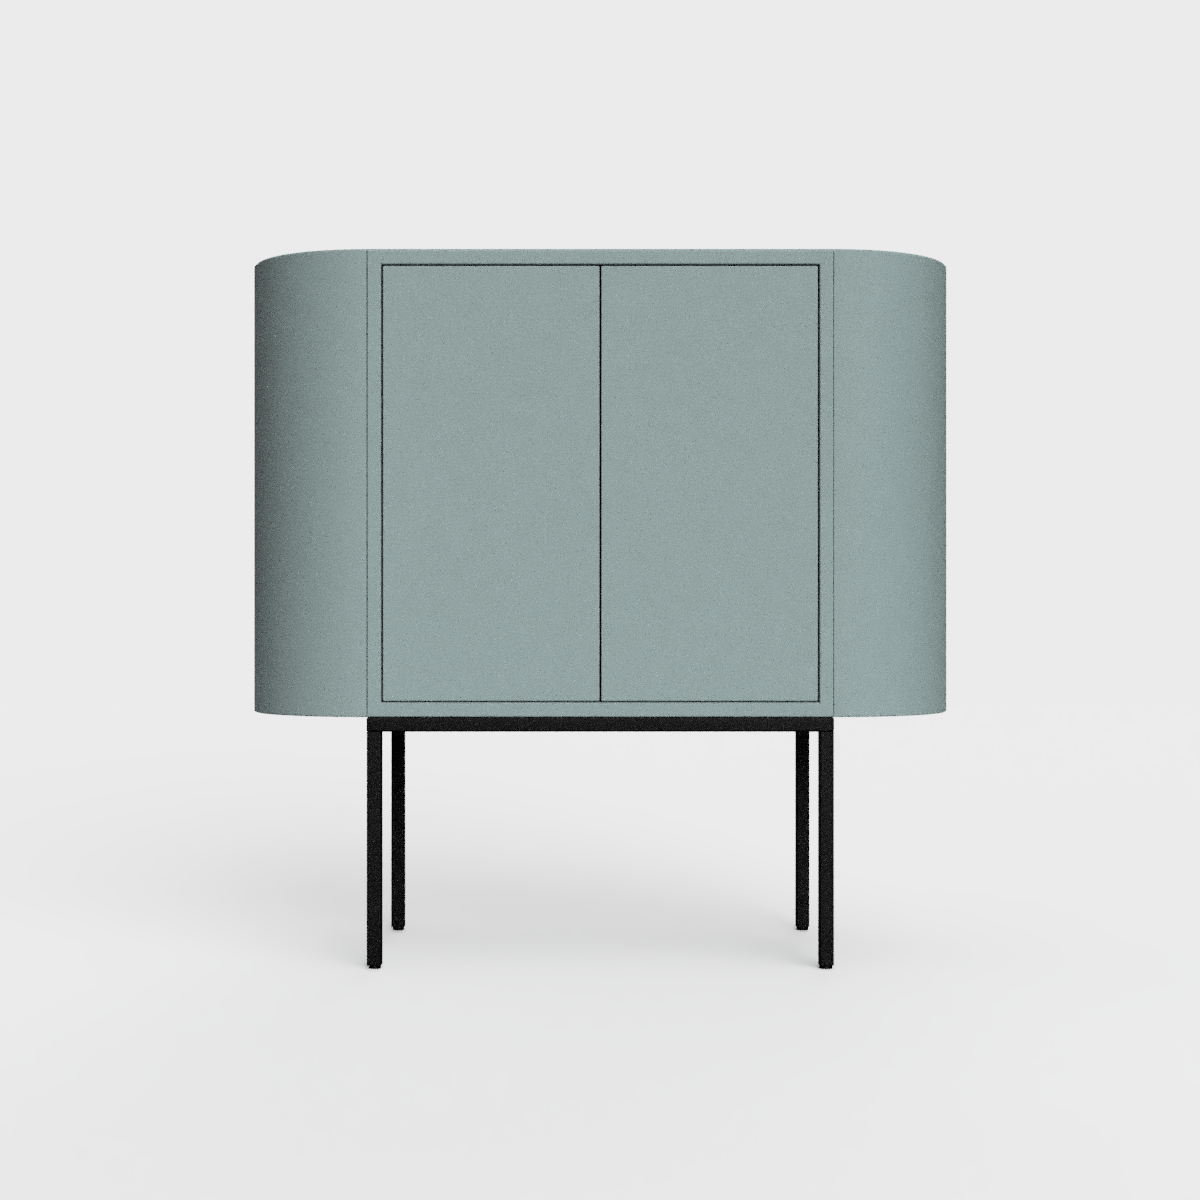 Siena 01 Sideboard in celadon green blue color, powder-coated steel, elegant and modern piece of furniture for your living room